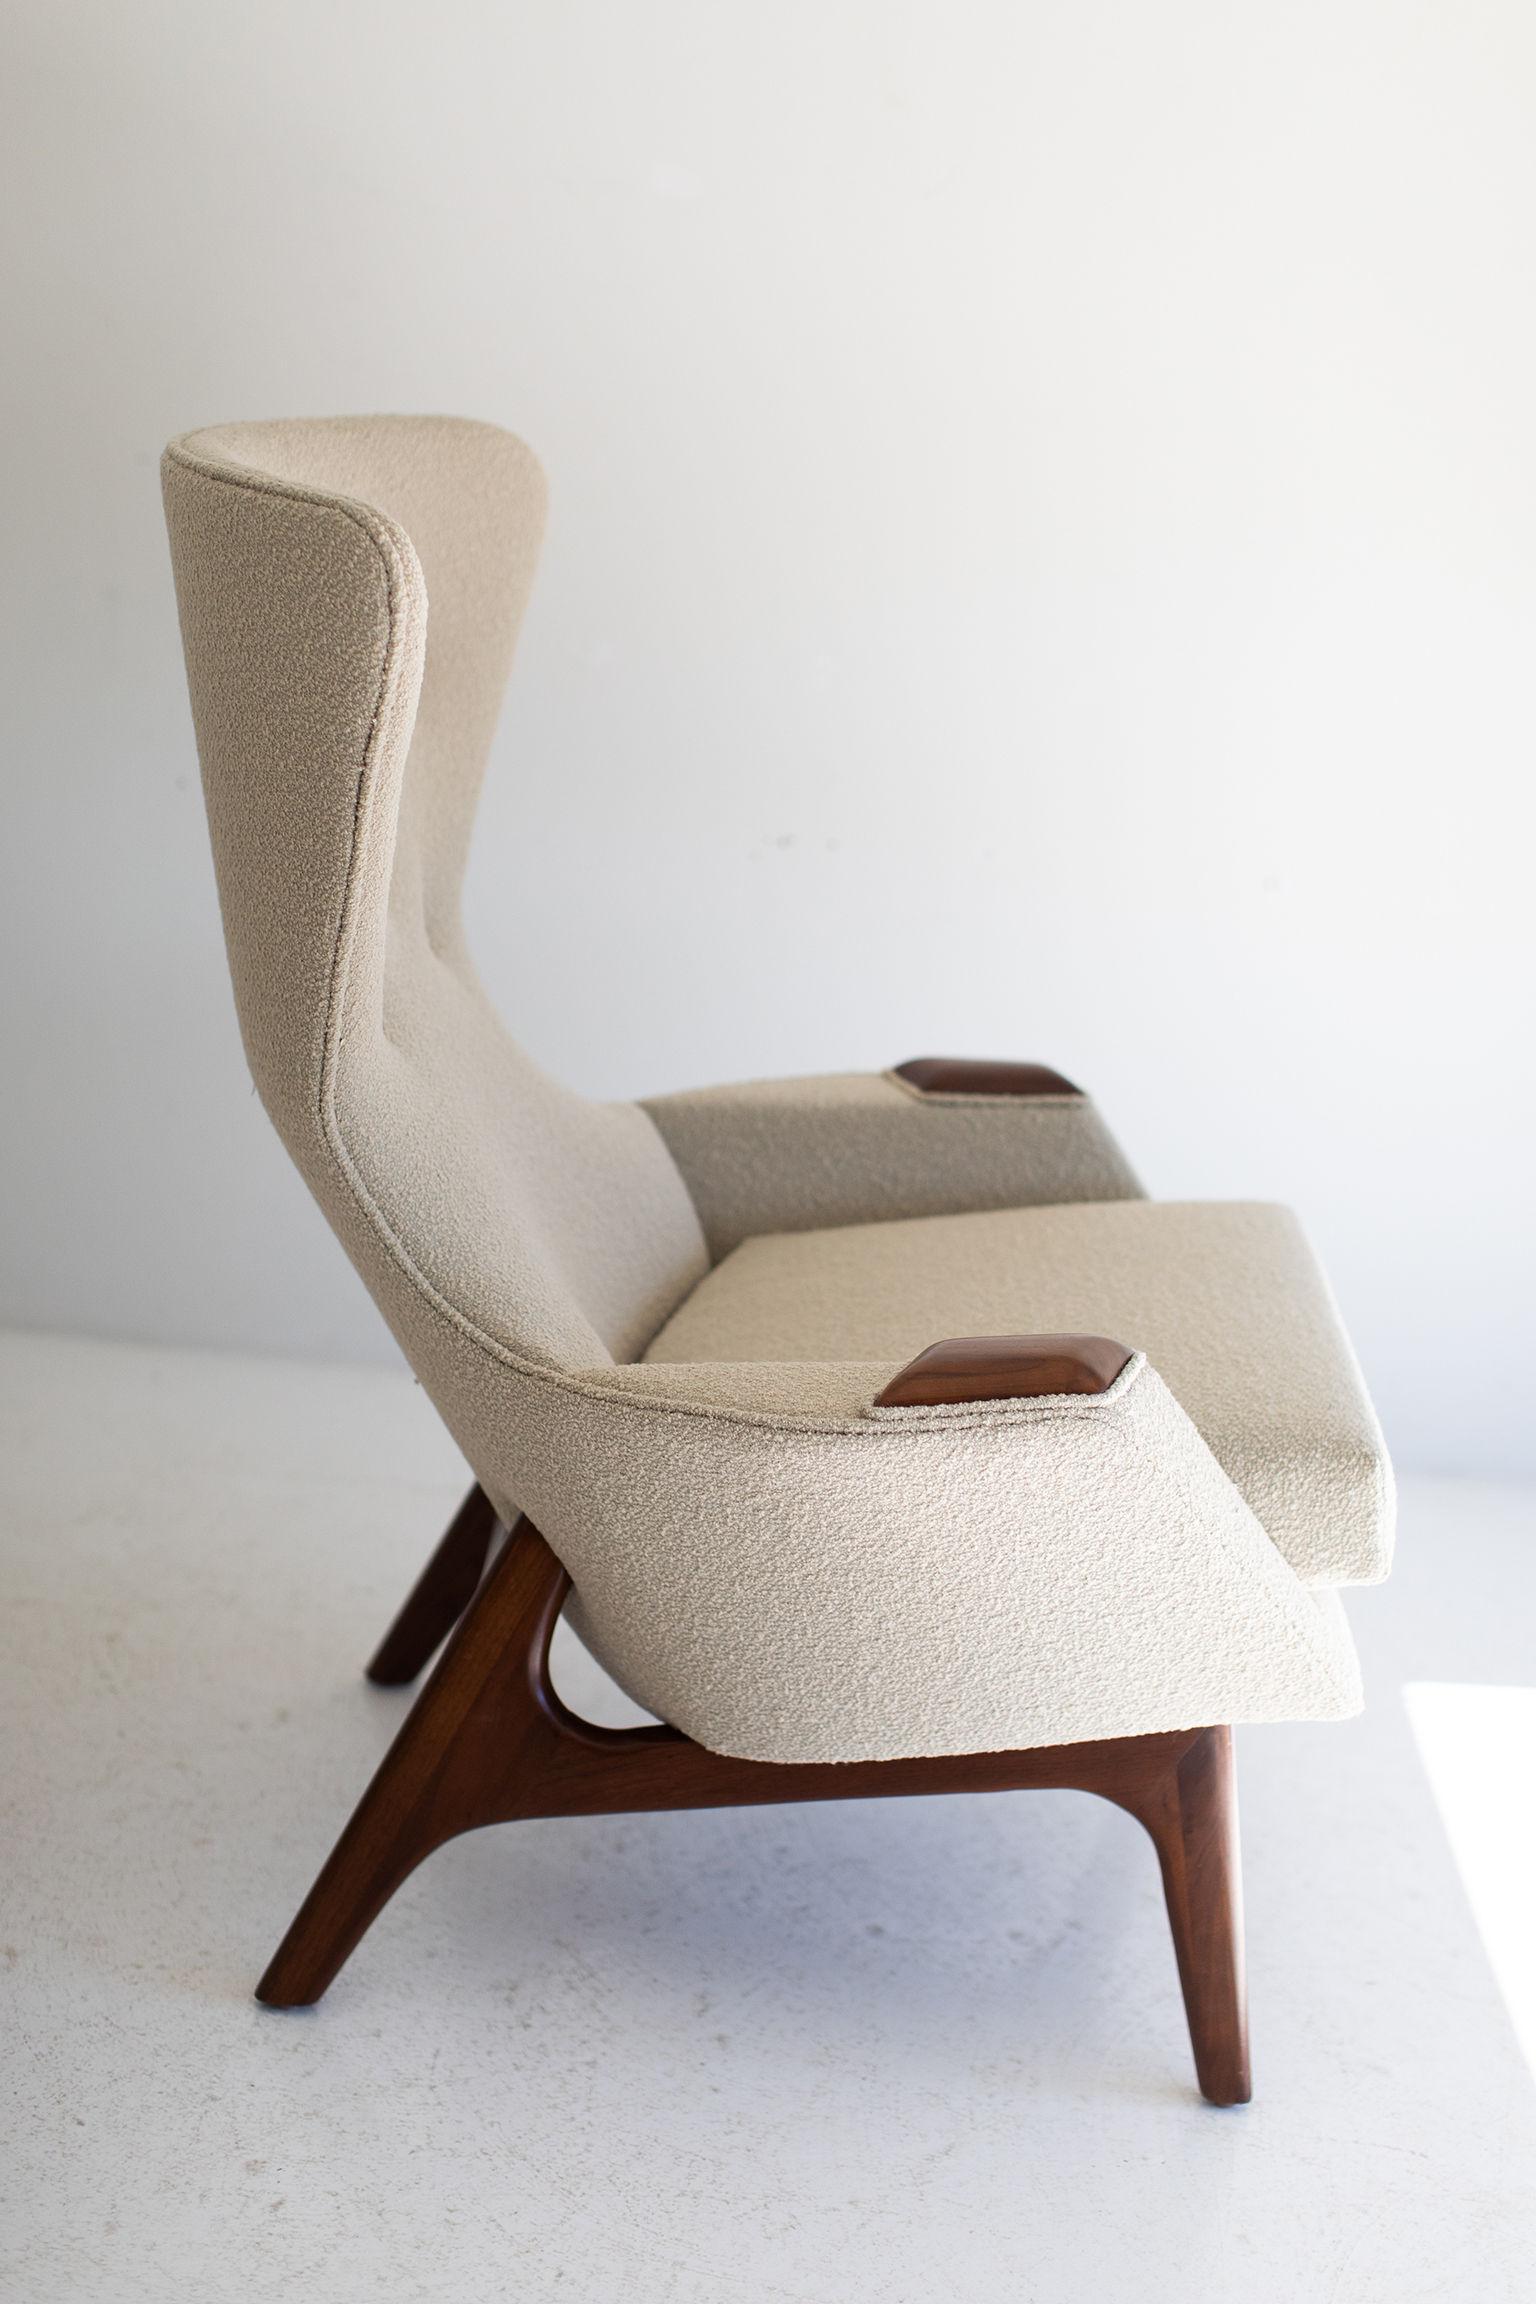 Adrian Pearsall Lounge Chairs for Craft Associates Inc 3